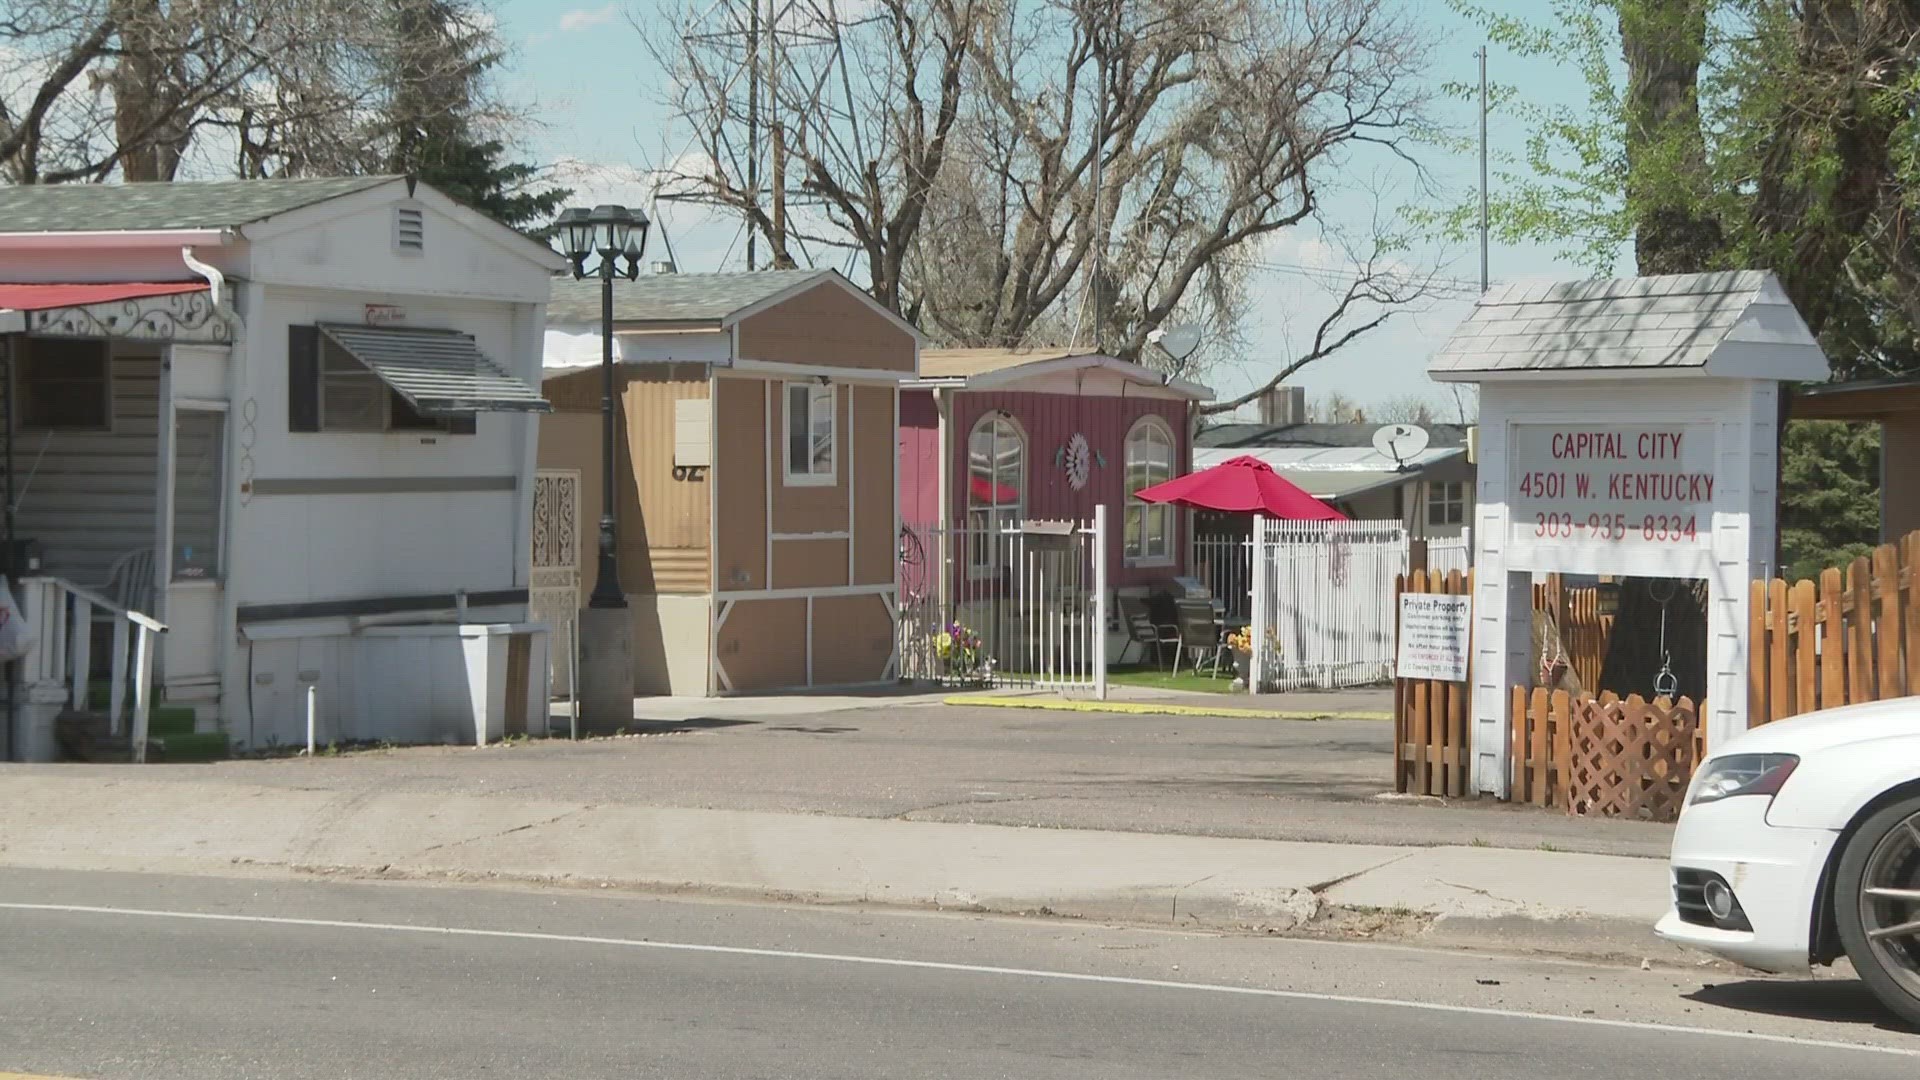 Capitol City Mobile Home Park residents are working to raise money to create a co-op that would put ownership of the land into the hands of those who live there.